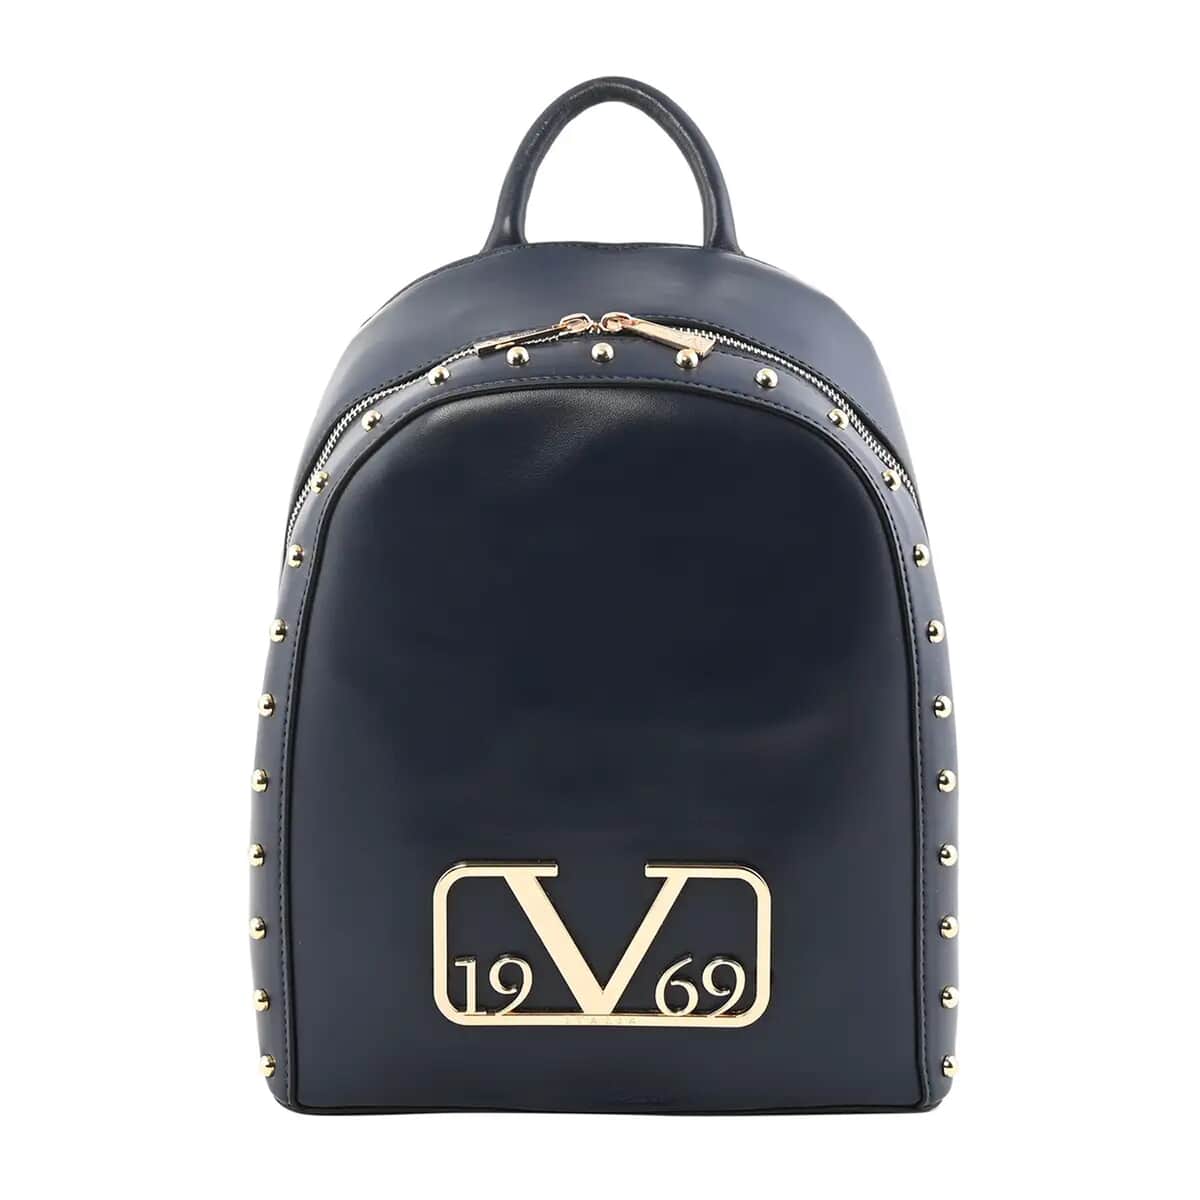 19V69 ITALIA by Alessandro Versace Smooth Texture Faux Leather Backpack for Women with Detachable Strap - Navy , Laptop Backpack , Backpack Purse , Shoulder Bag image number 0